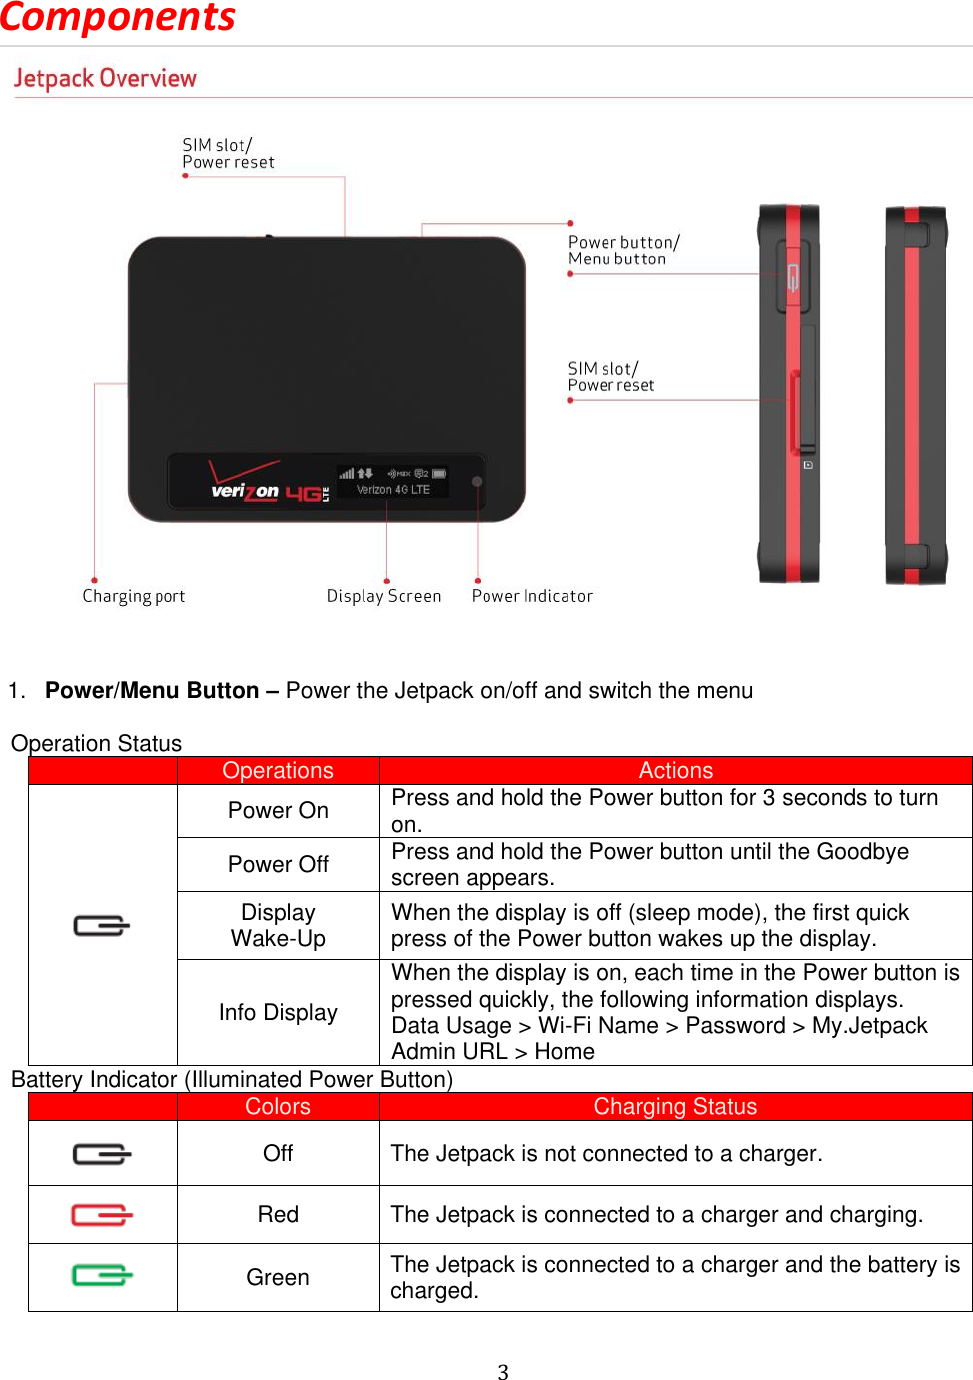   3  Components    1. Power/Menu Button – Power the Jetpack on/off and switch the menu    Operation Status  Operations Actions  Power On Press and hold the Power button for 3 seconds to turn on. Power Off Press and hold the Power button until the Goodbye screen appears. Display Wake-Up When the display is off (sleep mode), the first quick press of the Power button wakes up the display. Info Display When the display is on, each time in the Power button is pressed quickly, the following information displays. Data Usage &gt; Wi-Fi Name &gt; Password &gt; My.Jetpack Admin URL &gt; Home   Battery Indicator (Illuminated Power Button)  Colors Charging Status  Off The Jetpack is not connected to a charger.  Red The Jetpack is connected to a charger and charging.  Green The Jetpack is connected to a charger and the battery is charged. 